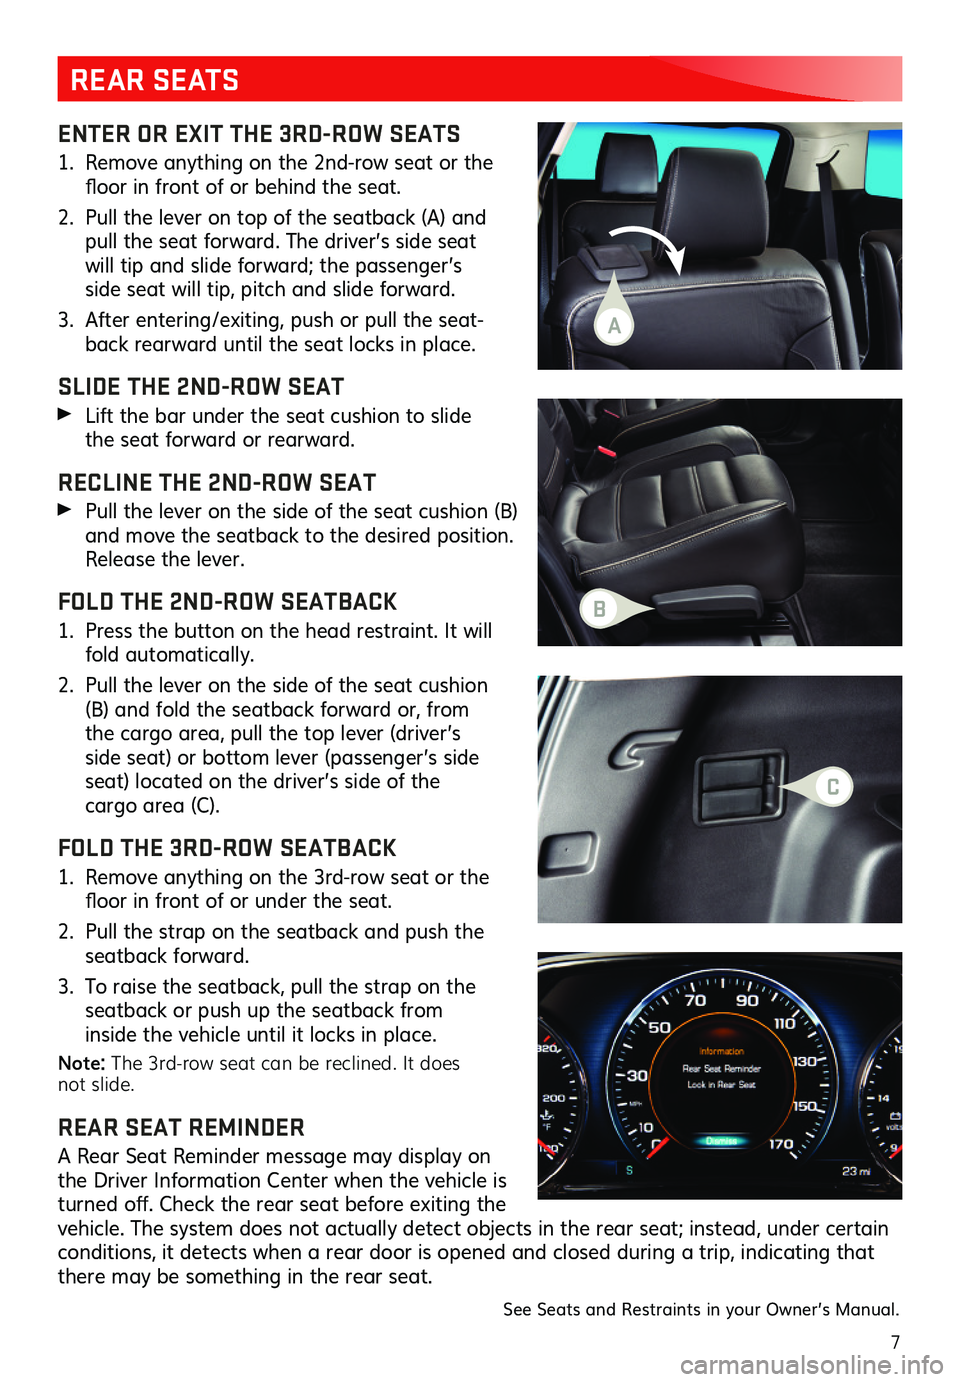 GMC ACADIA 2019  Get To Know Guide 7
ENTER OR EXIT THE 3RD-ROW SEATS
1. Remove anything on the 2nd-row seat or the floor  in front  of or  behind  the seat.  
2. Pull the lever on top of the seatback (A) and pull the seat forwa